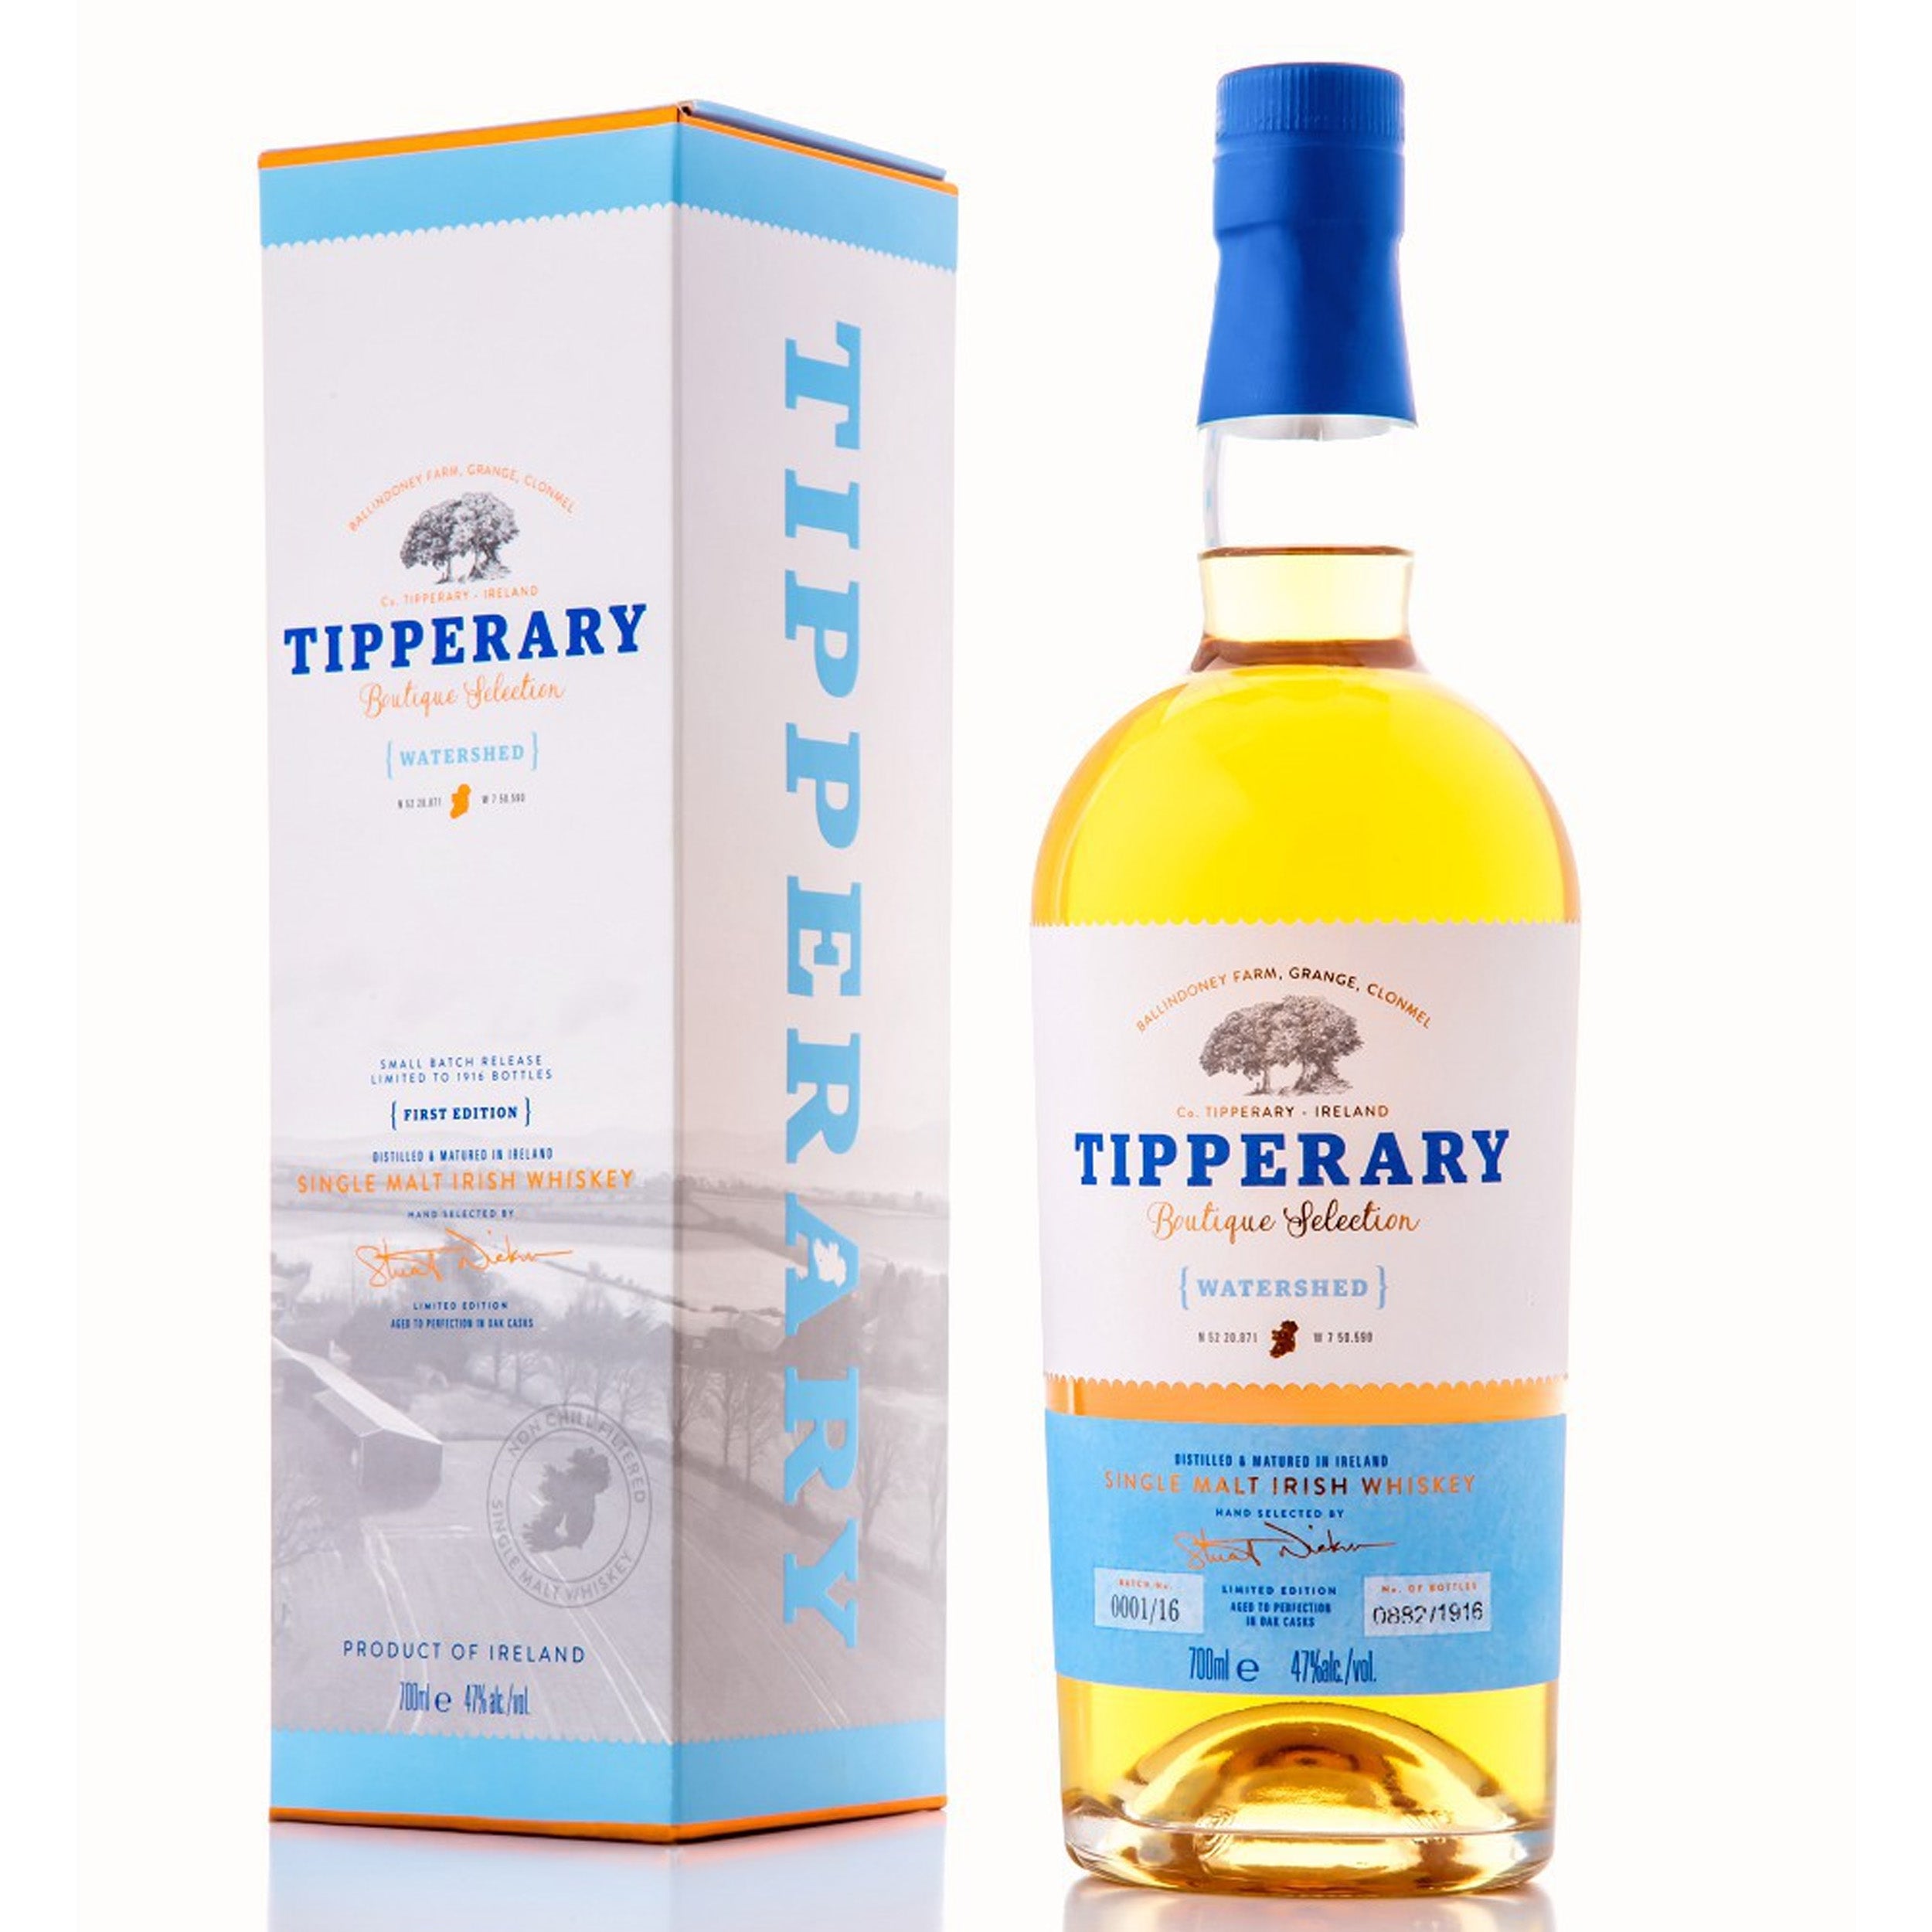 Tipperary Boutique Selection Watershed Limited Edition Single Malt Irish Whiskey